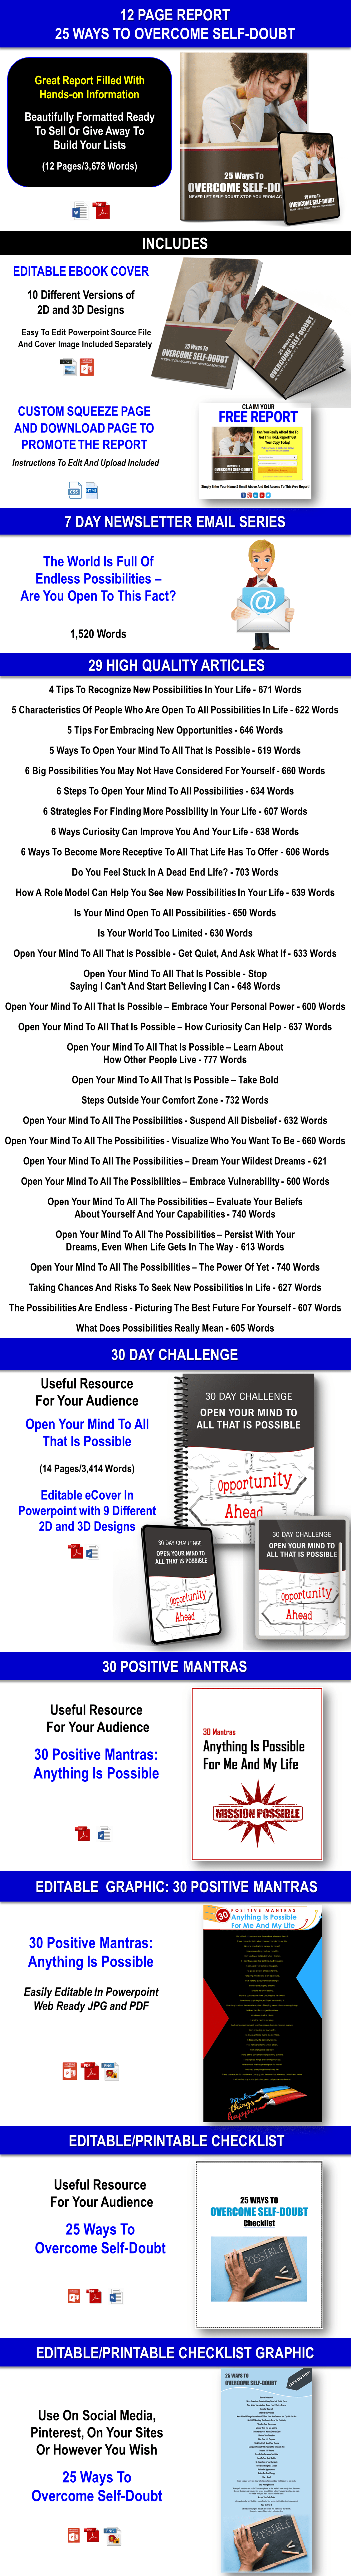 Master Your Destiny – The Anything Is Possible Mindset - Become Open To All The Possibilities Giant Content Pack PLR Rights